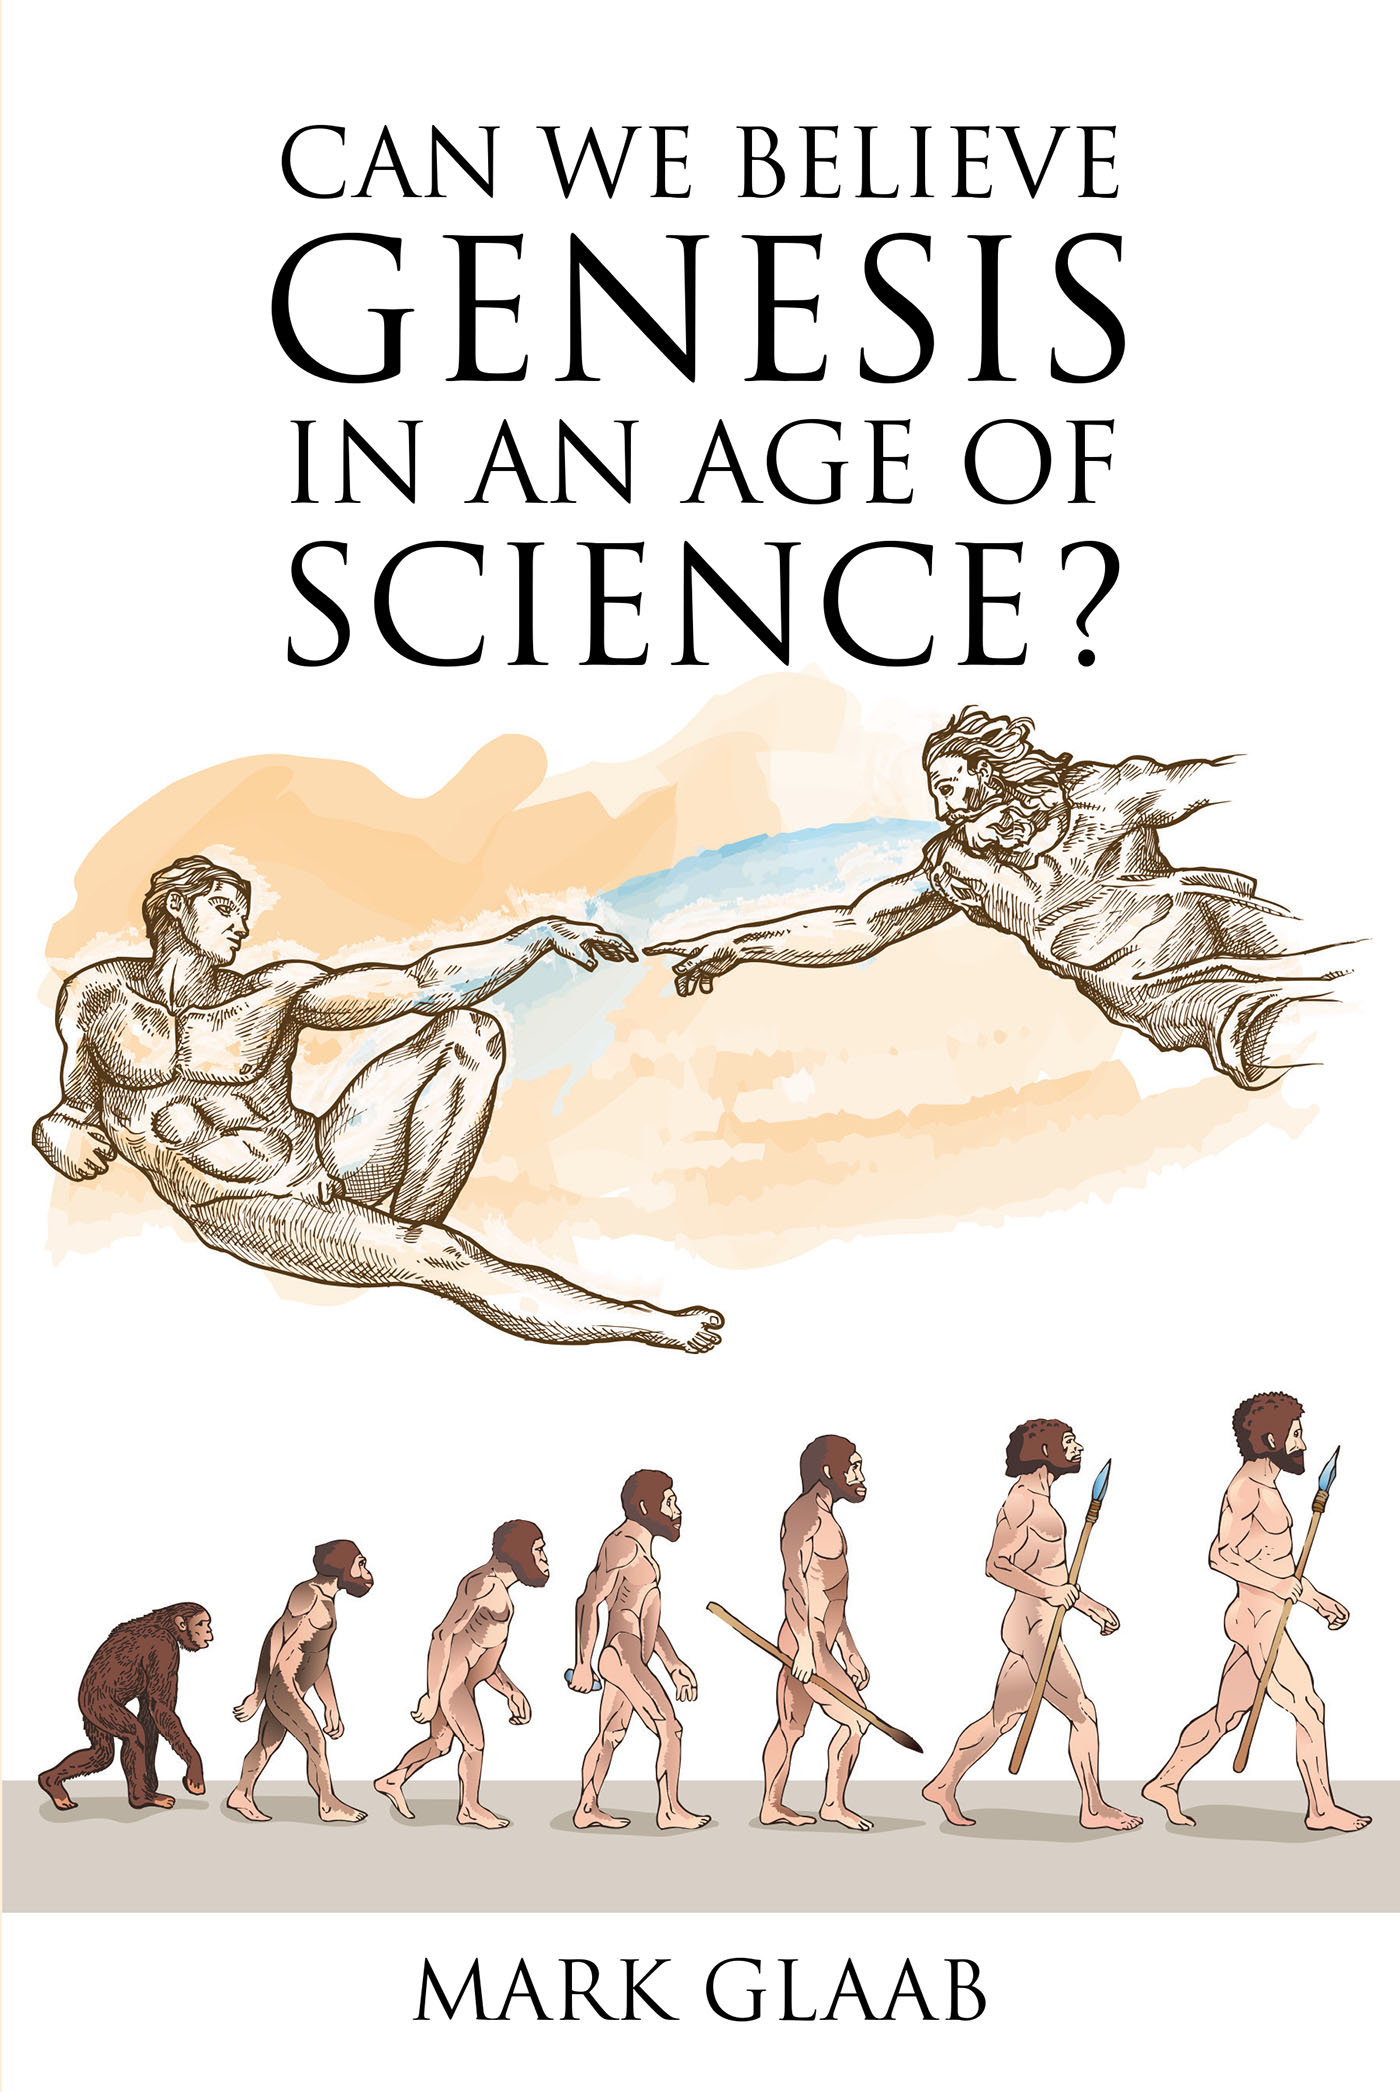 Mark Glaab’s Newly Released "Can We Believe Genesis in an Age of Science?" is a Compelling Argument for the Infallibility of Biblical Truth